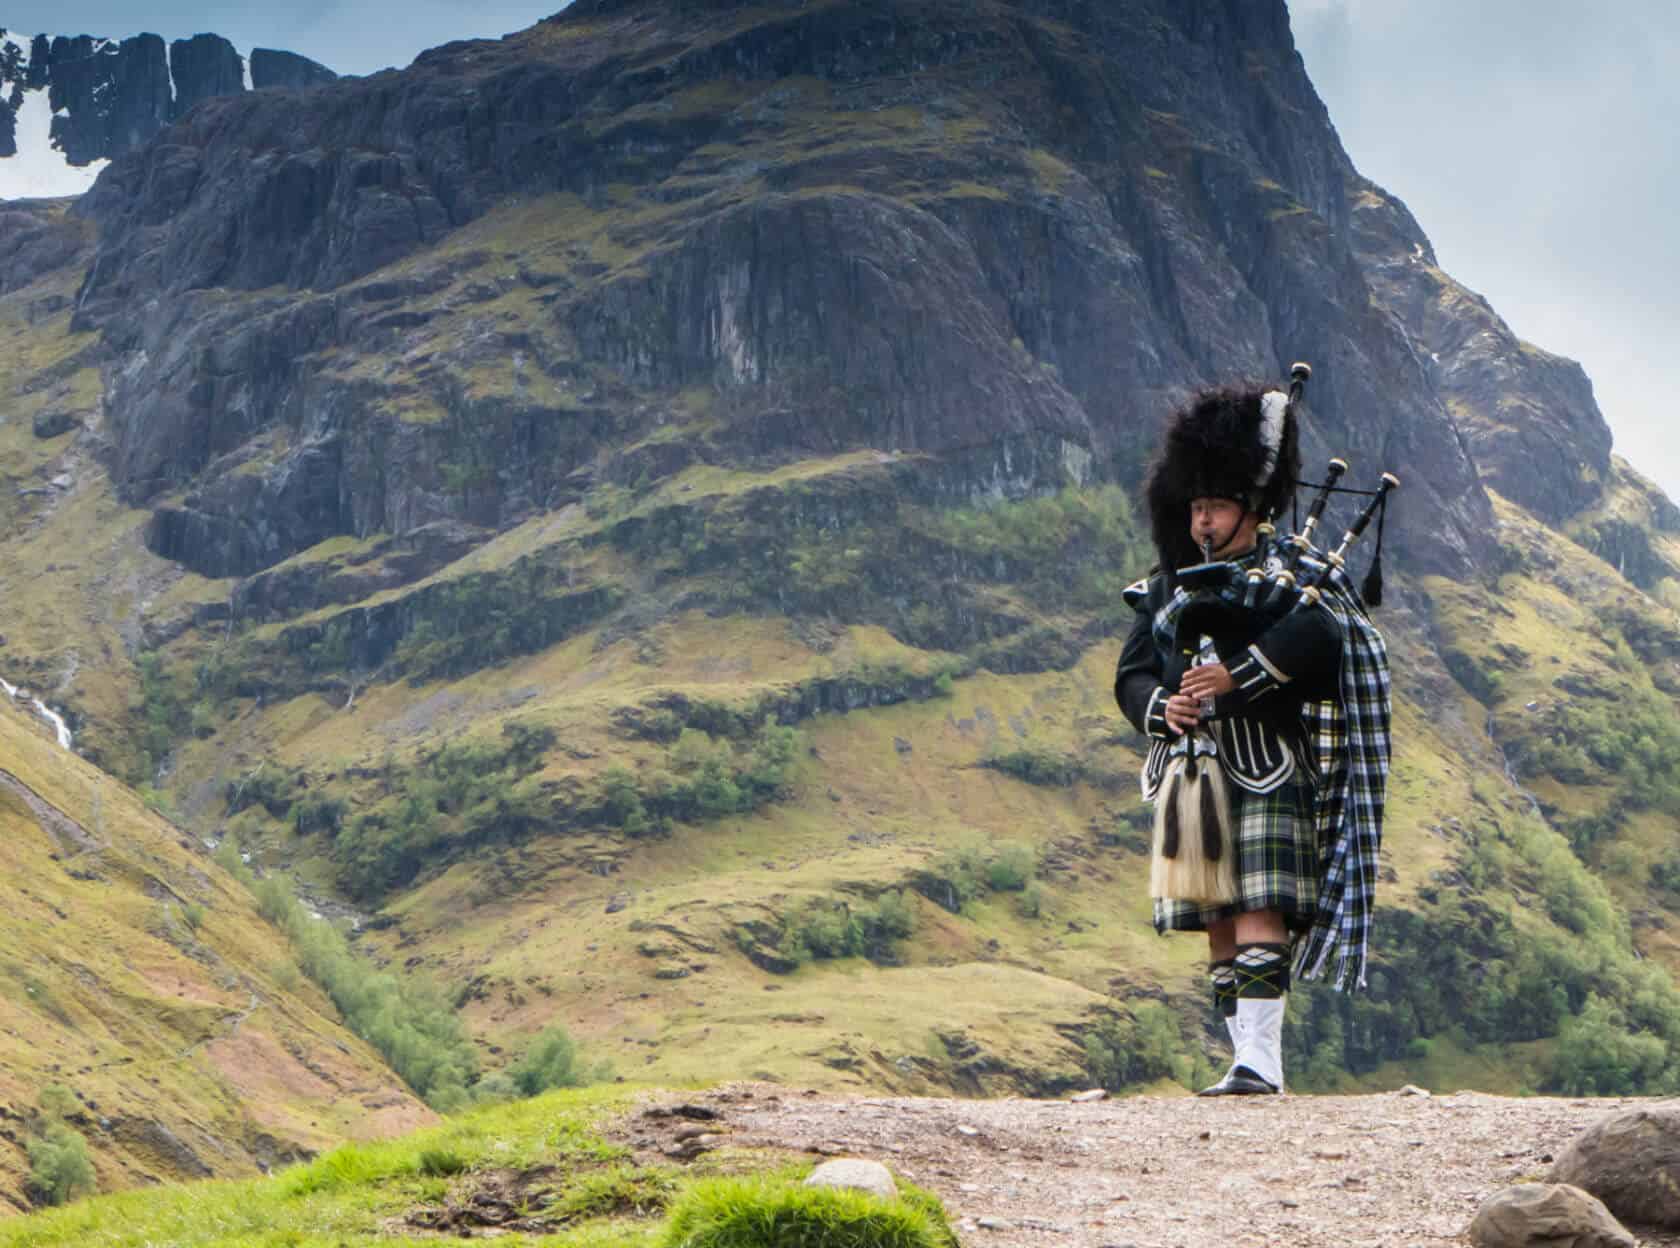 Scottish performer in mountains